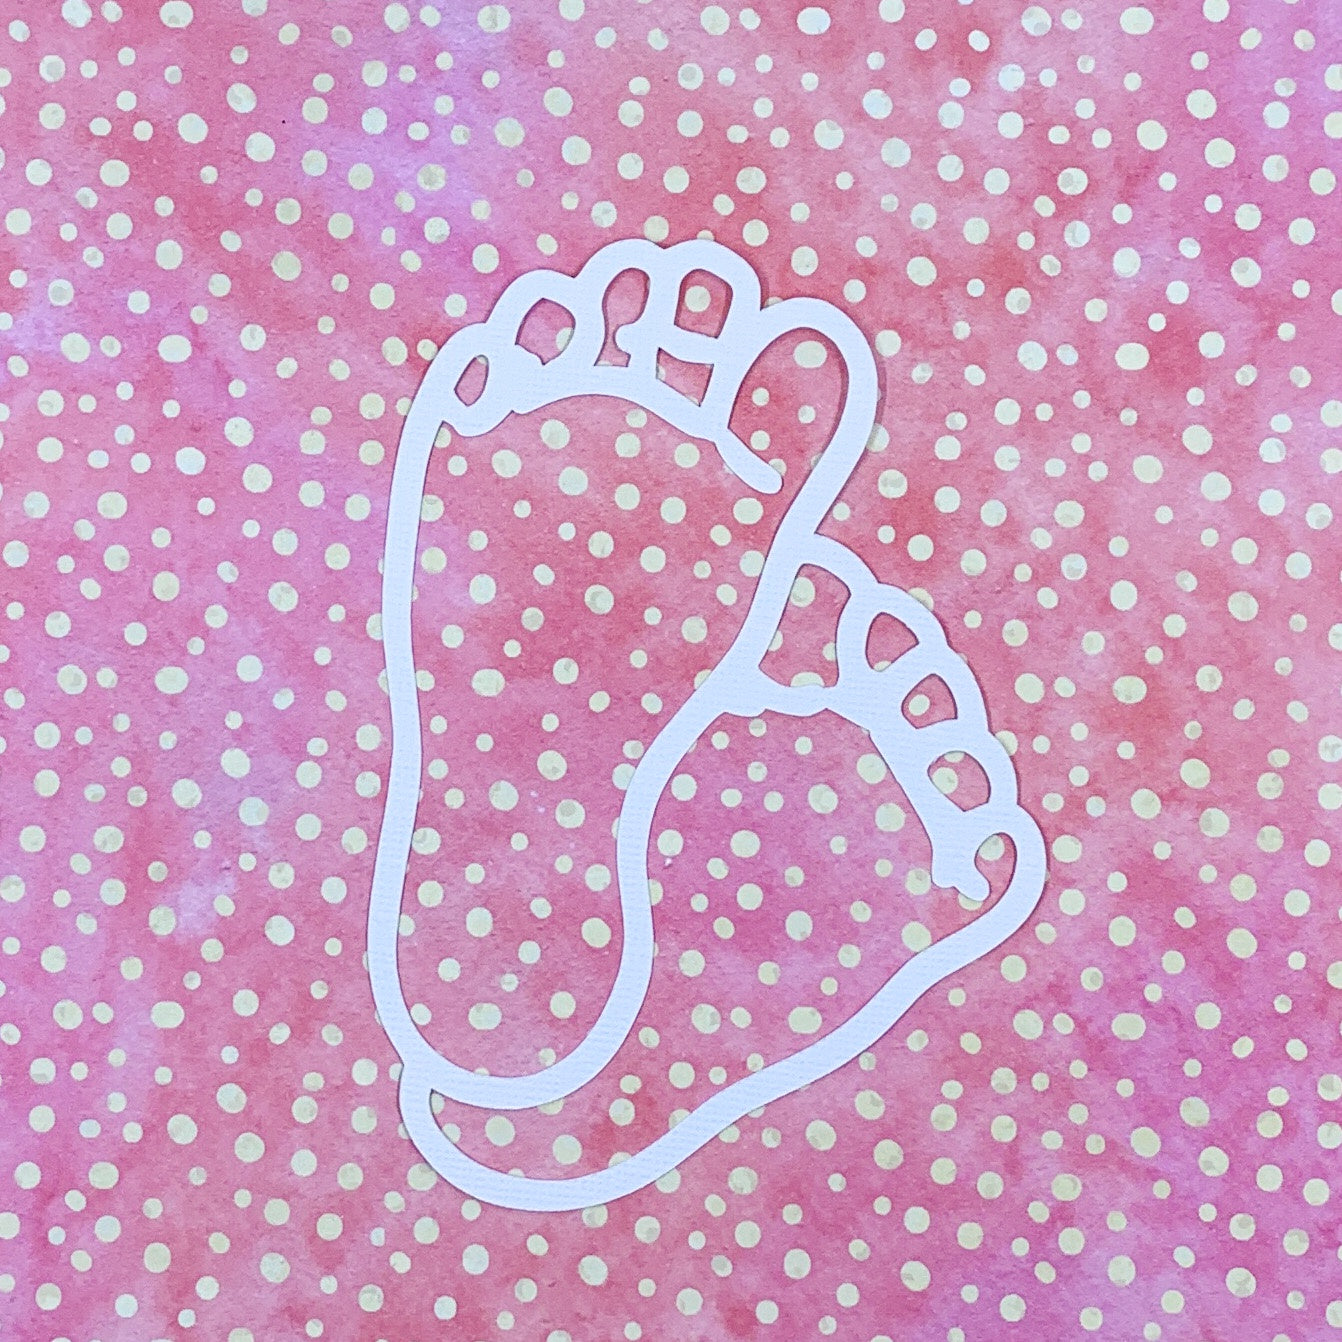 Tropicana - Feet (medium) 4"x4.75" White Linen Cardstock Picture-Cut - Designed by Alicia Redshaw